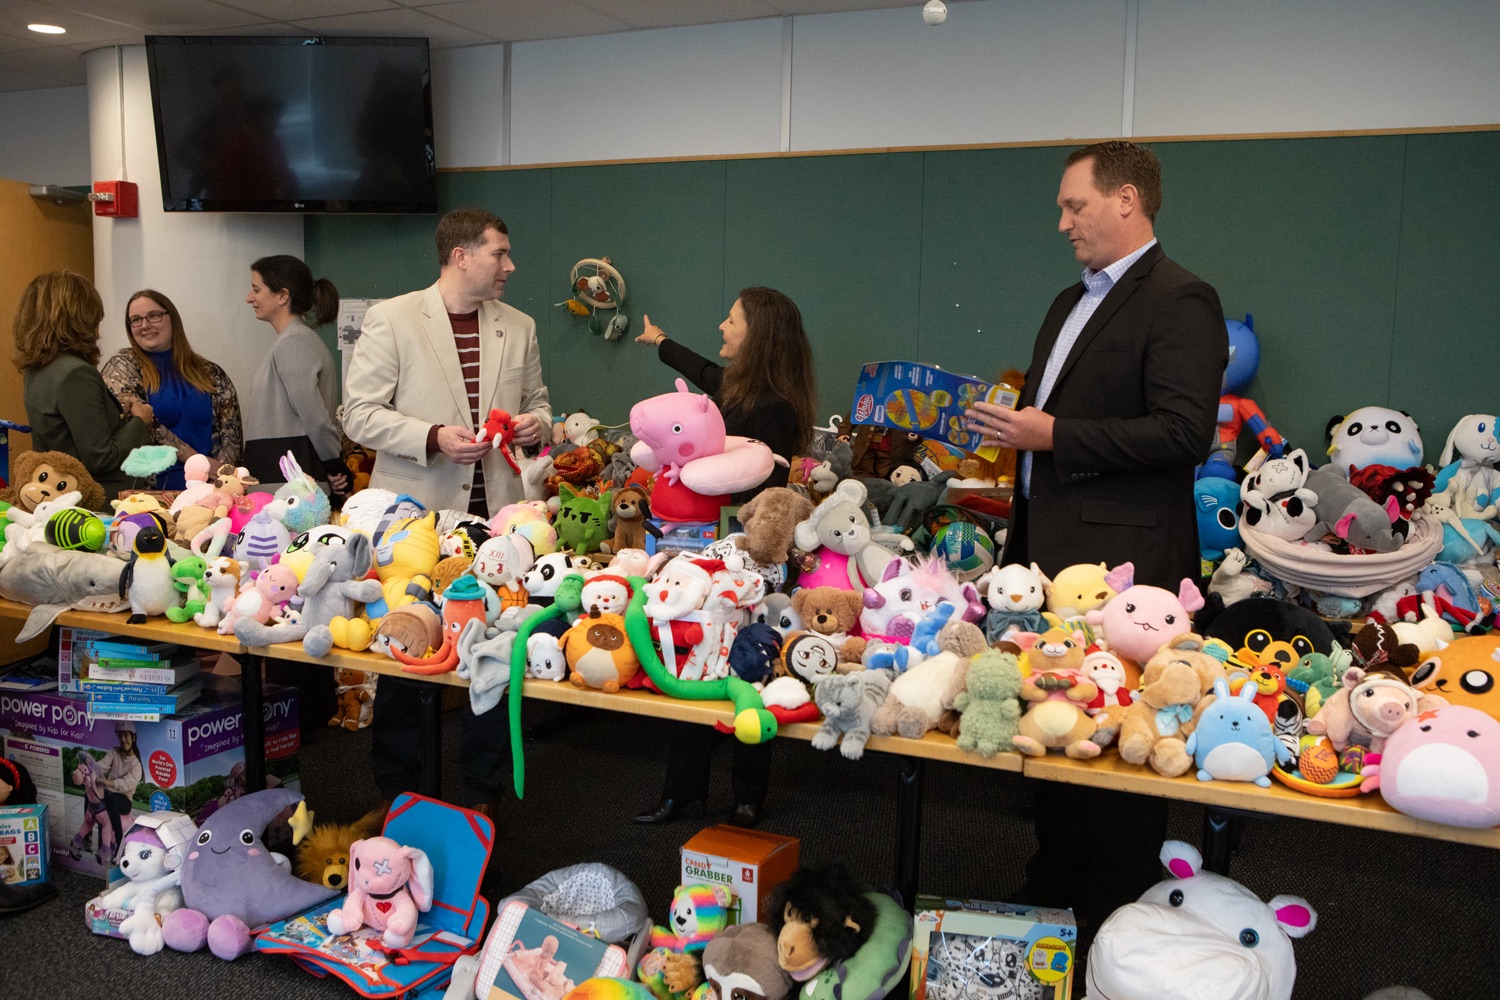 The Pennsylvania Departments of Labor & Industry (L&I) and Human Services (DHS) kicked off the 2023 holiday season Wednesday with an annual donation of stuffed toys collected throughout the year by L&I during routine safety inspections. The toys will be distributed to Pennsylvania families through DHS Holiday Wish program. . ."We inspect these stuffed toys throughout the year to ensure their safety for all children in Pennsylvania. Its become a tradition at L&I to donate the inspected toys to the Holiday Wish program because we get to brighten the holidays for a few children while reminding parents and retailers of the importance of toy safety, L&I Secretary Nancy A. Walker. I encourage any Pennsylvanian who can give a little extra this year to consider donating to a holiday charity. The joy and happiness through a simple act of kindness can lead to lifelong memories for countless Pennsylvania children.<br><a href="https://filesource.amperwave.net/commonwealthofpa/photo/24018_LI_StuffedToys_ERD_017.jpg" target="_blank">⇣ Download Photo</a>